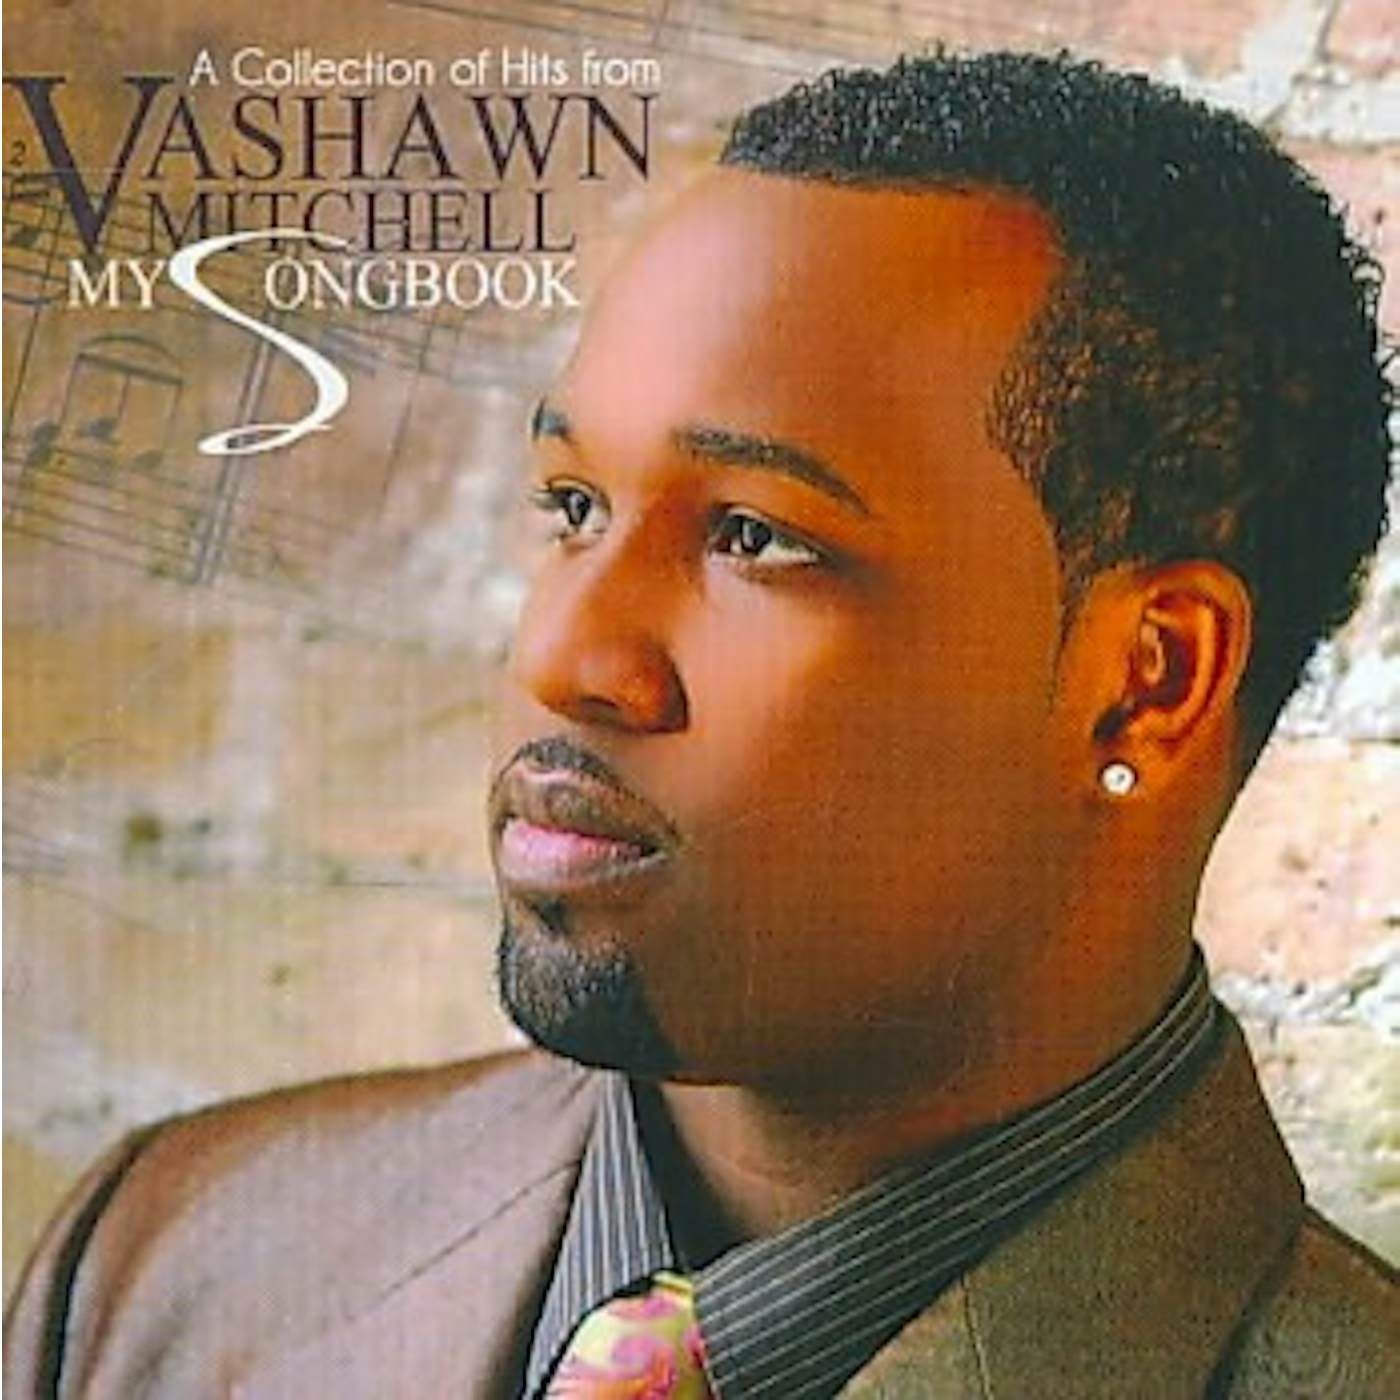 VaShawn Mitchell My Songbook (Deluxe Edition) CD